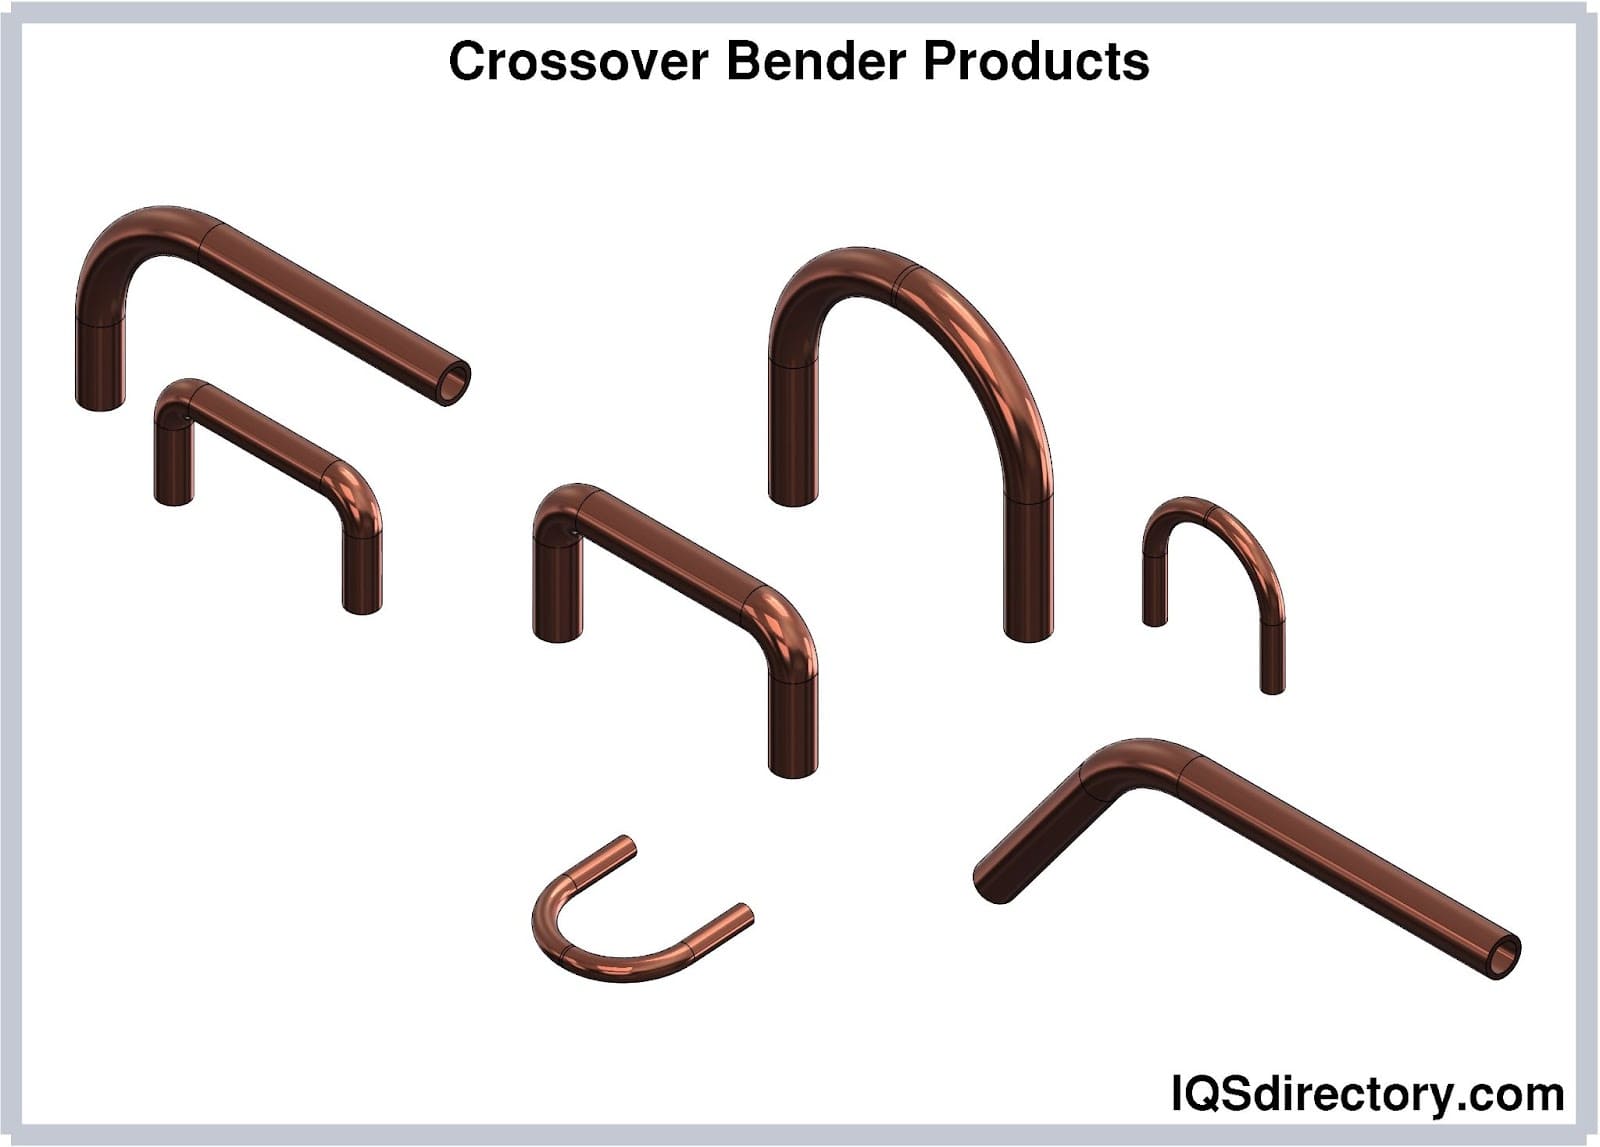 Crossover Bender Products